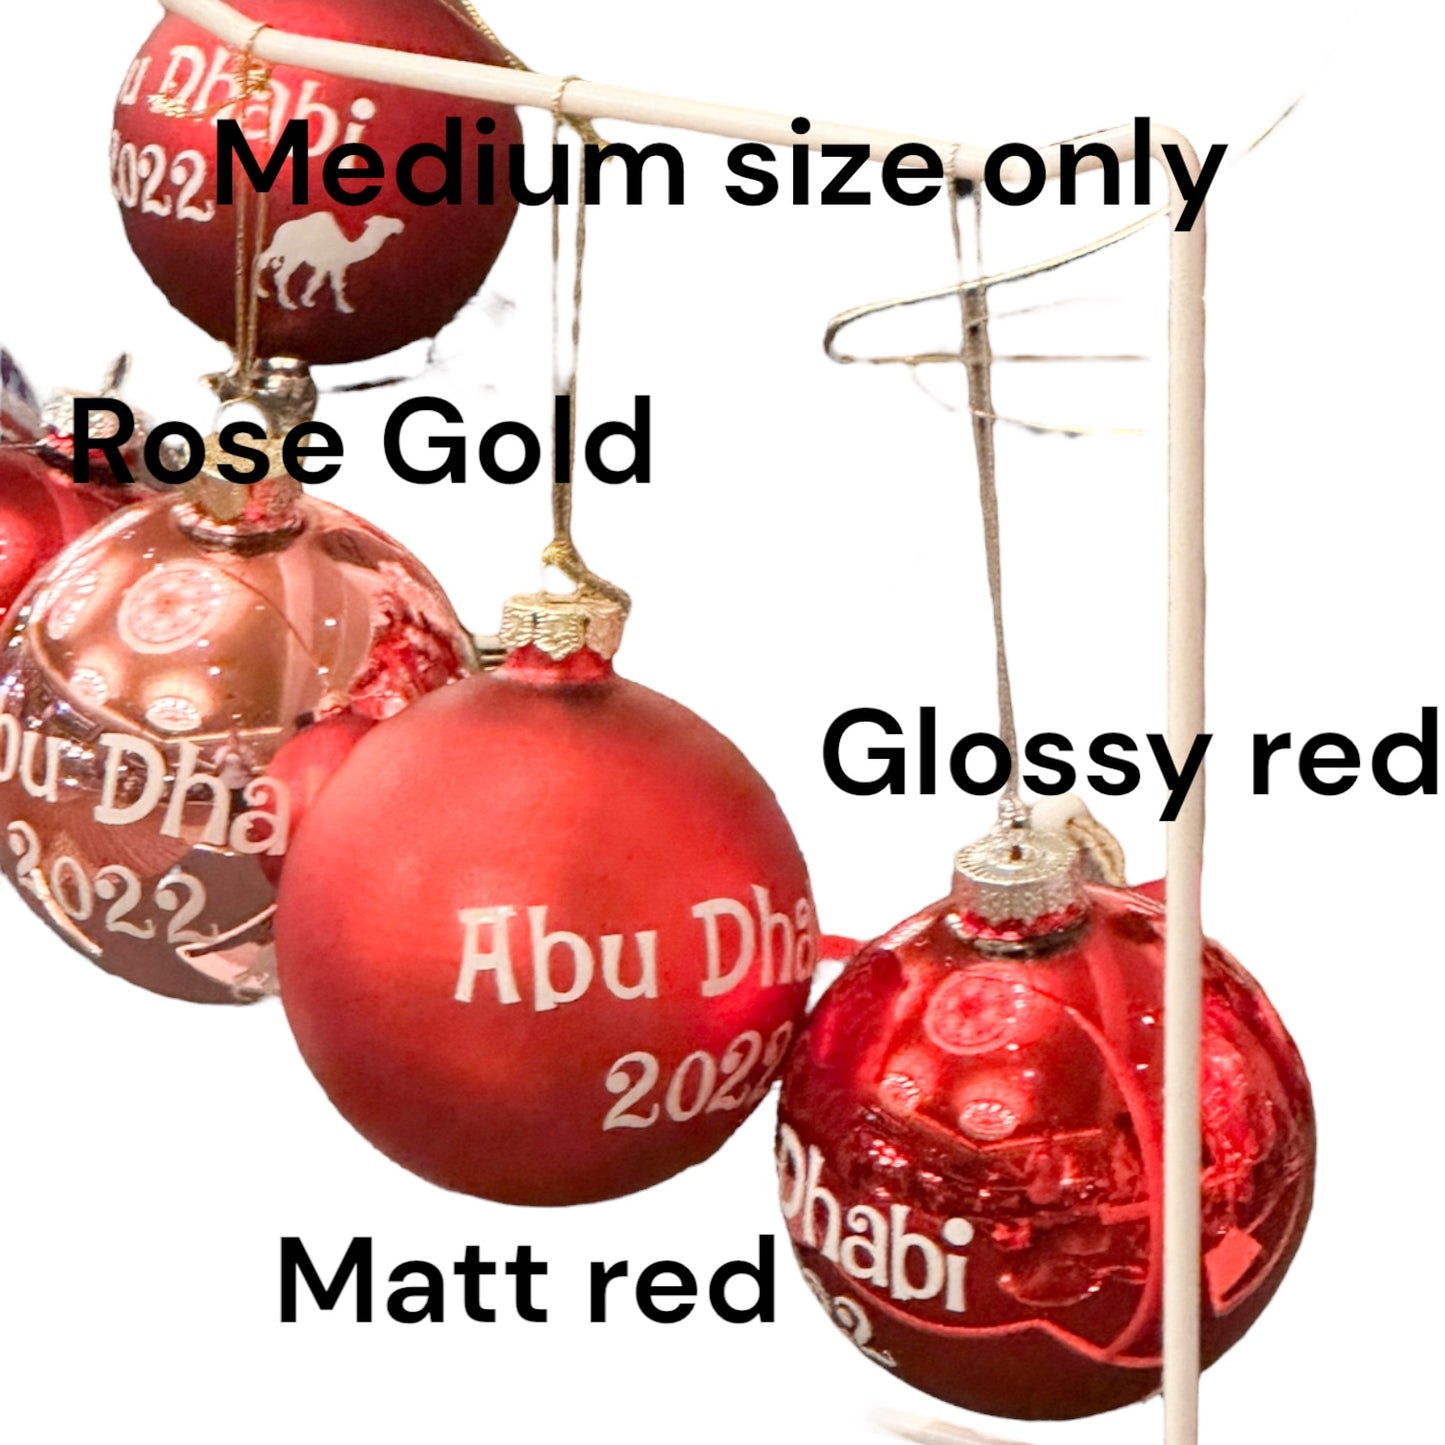 Personalised Name Glass Bauble